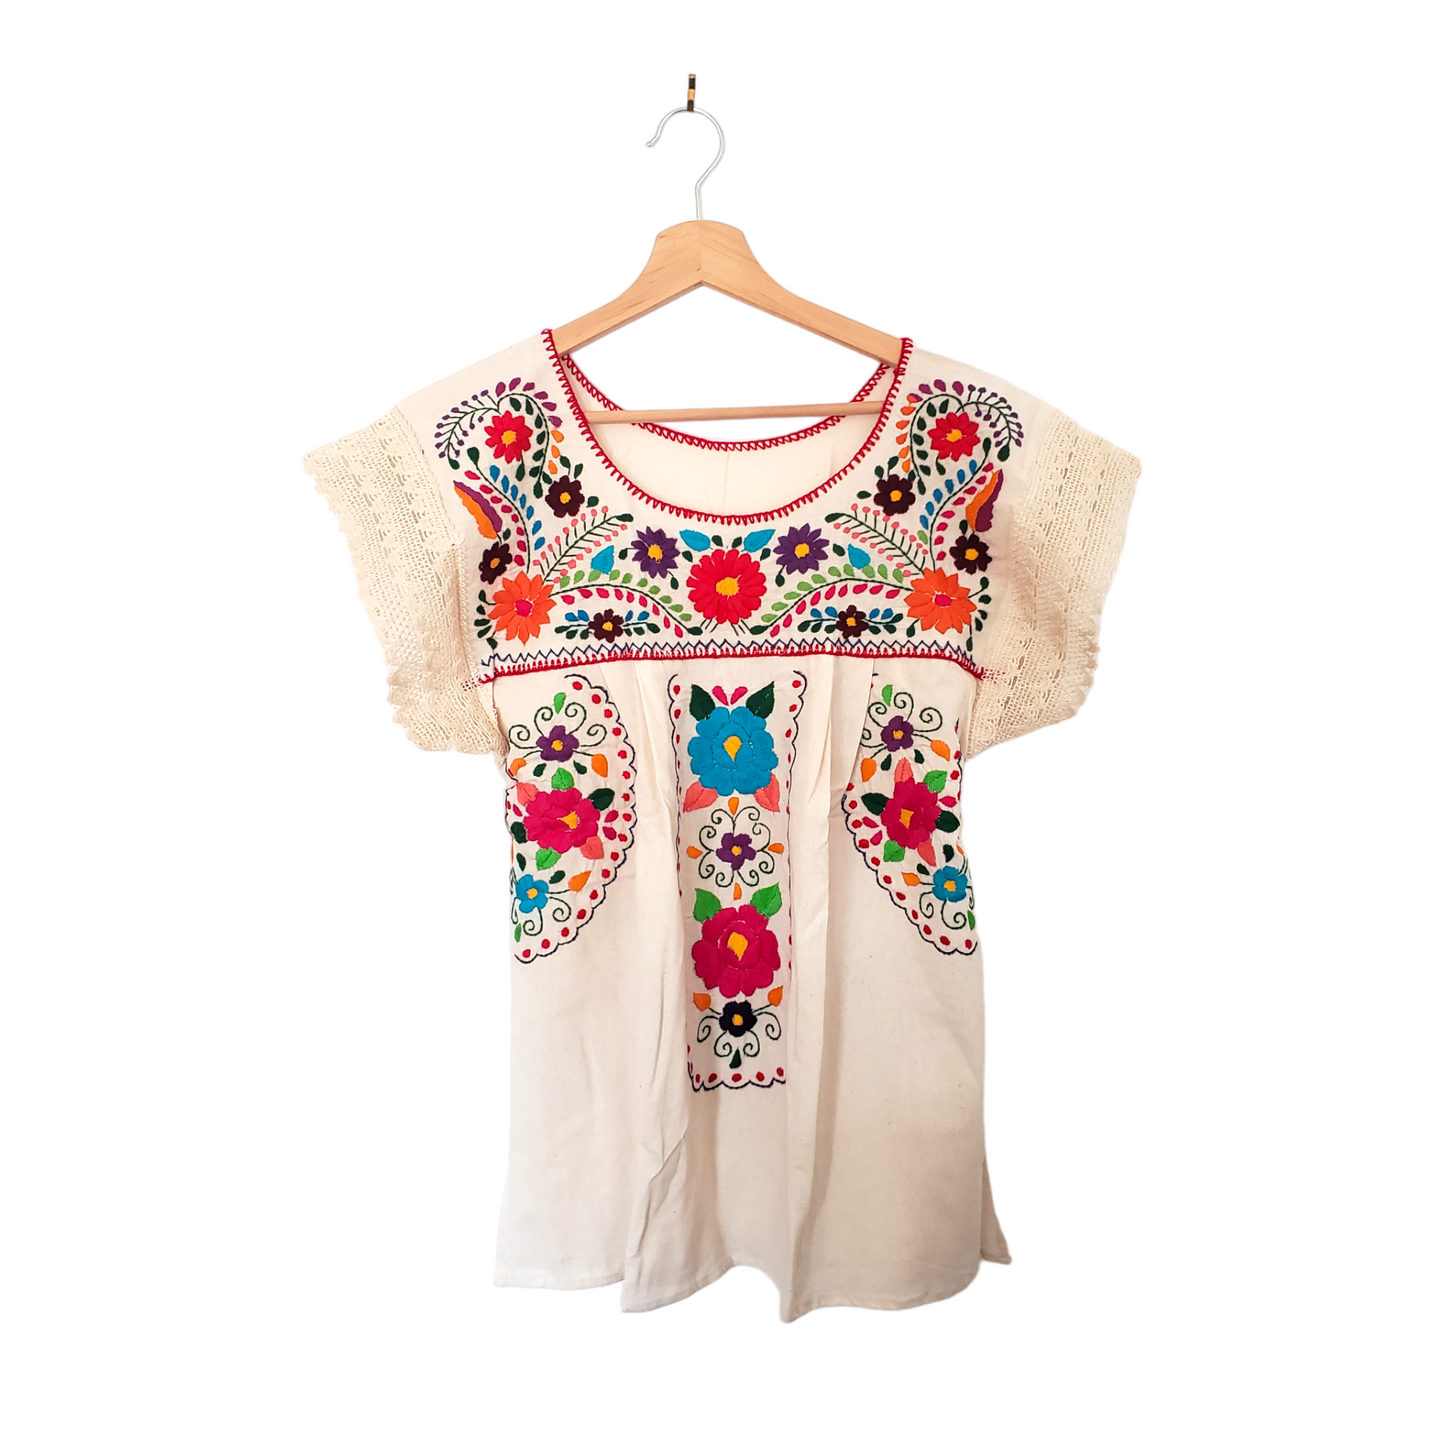 Traditional Mexican Embroidered Shirt Floral Top Blouse Handmade Beige Gypsy Hippie Ethnic Peasant Boho  Oaxaca Floral